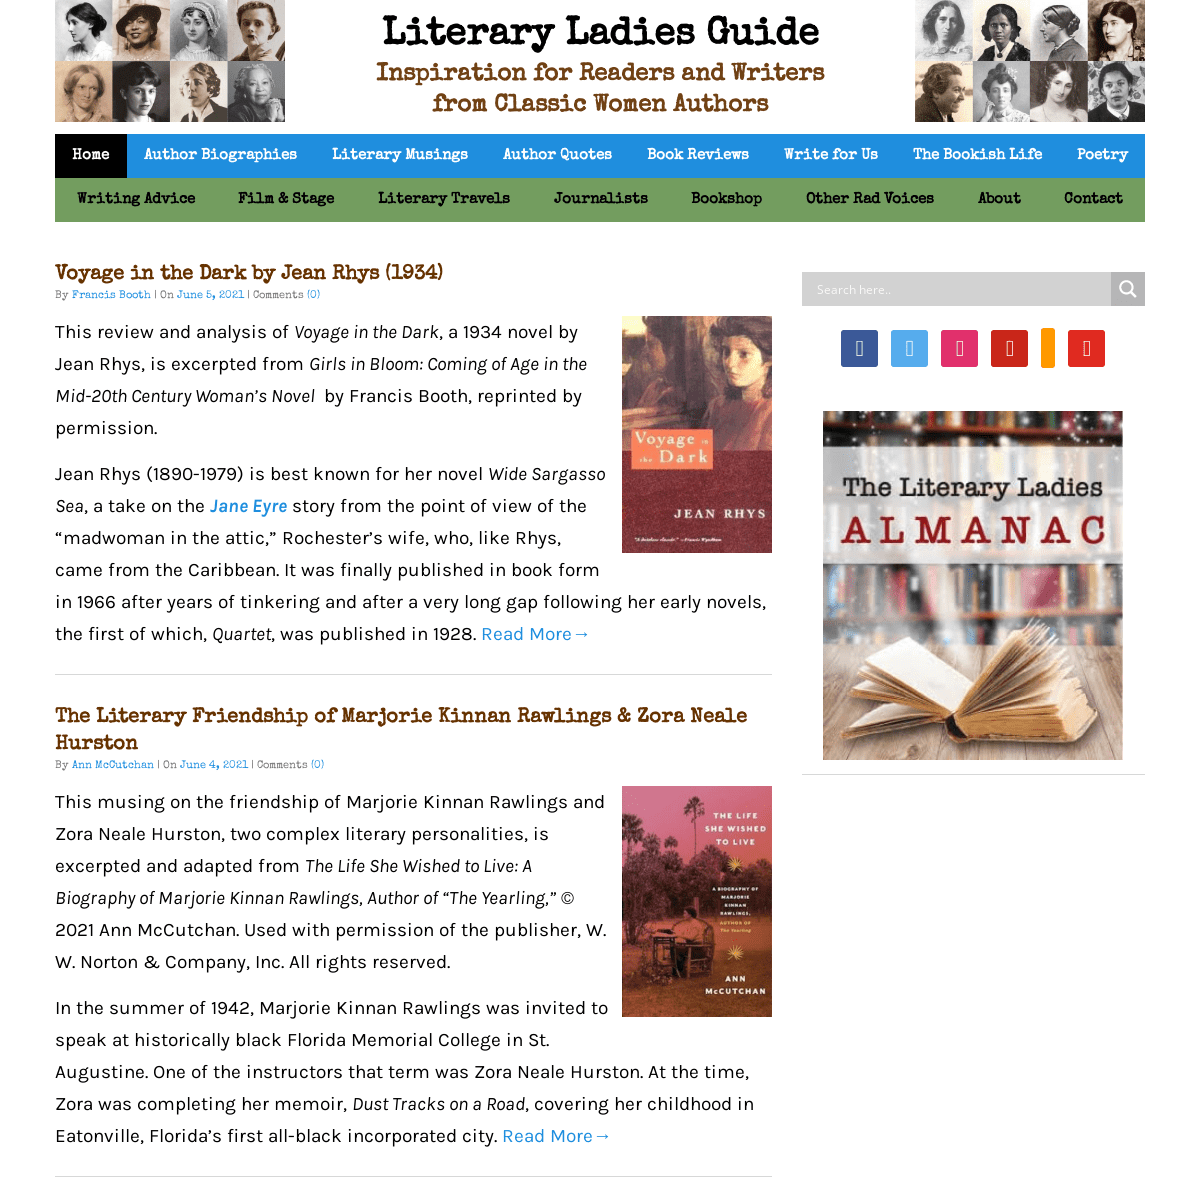 A complete backup of https://literaryladiesguide.com